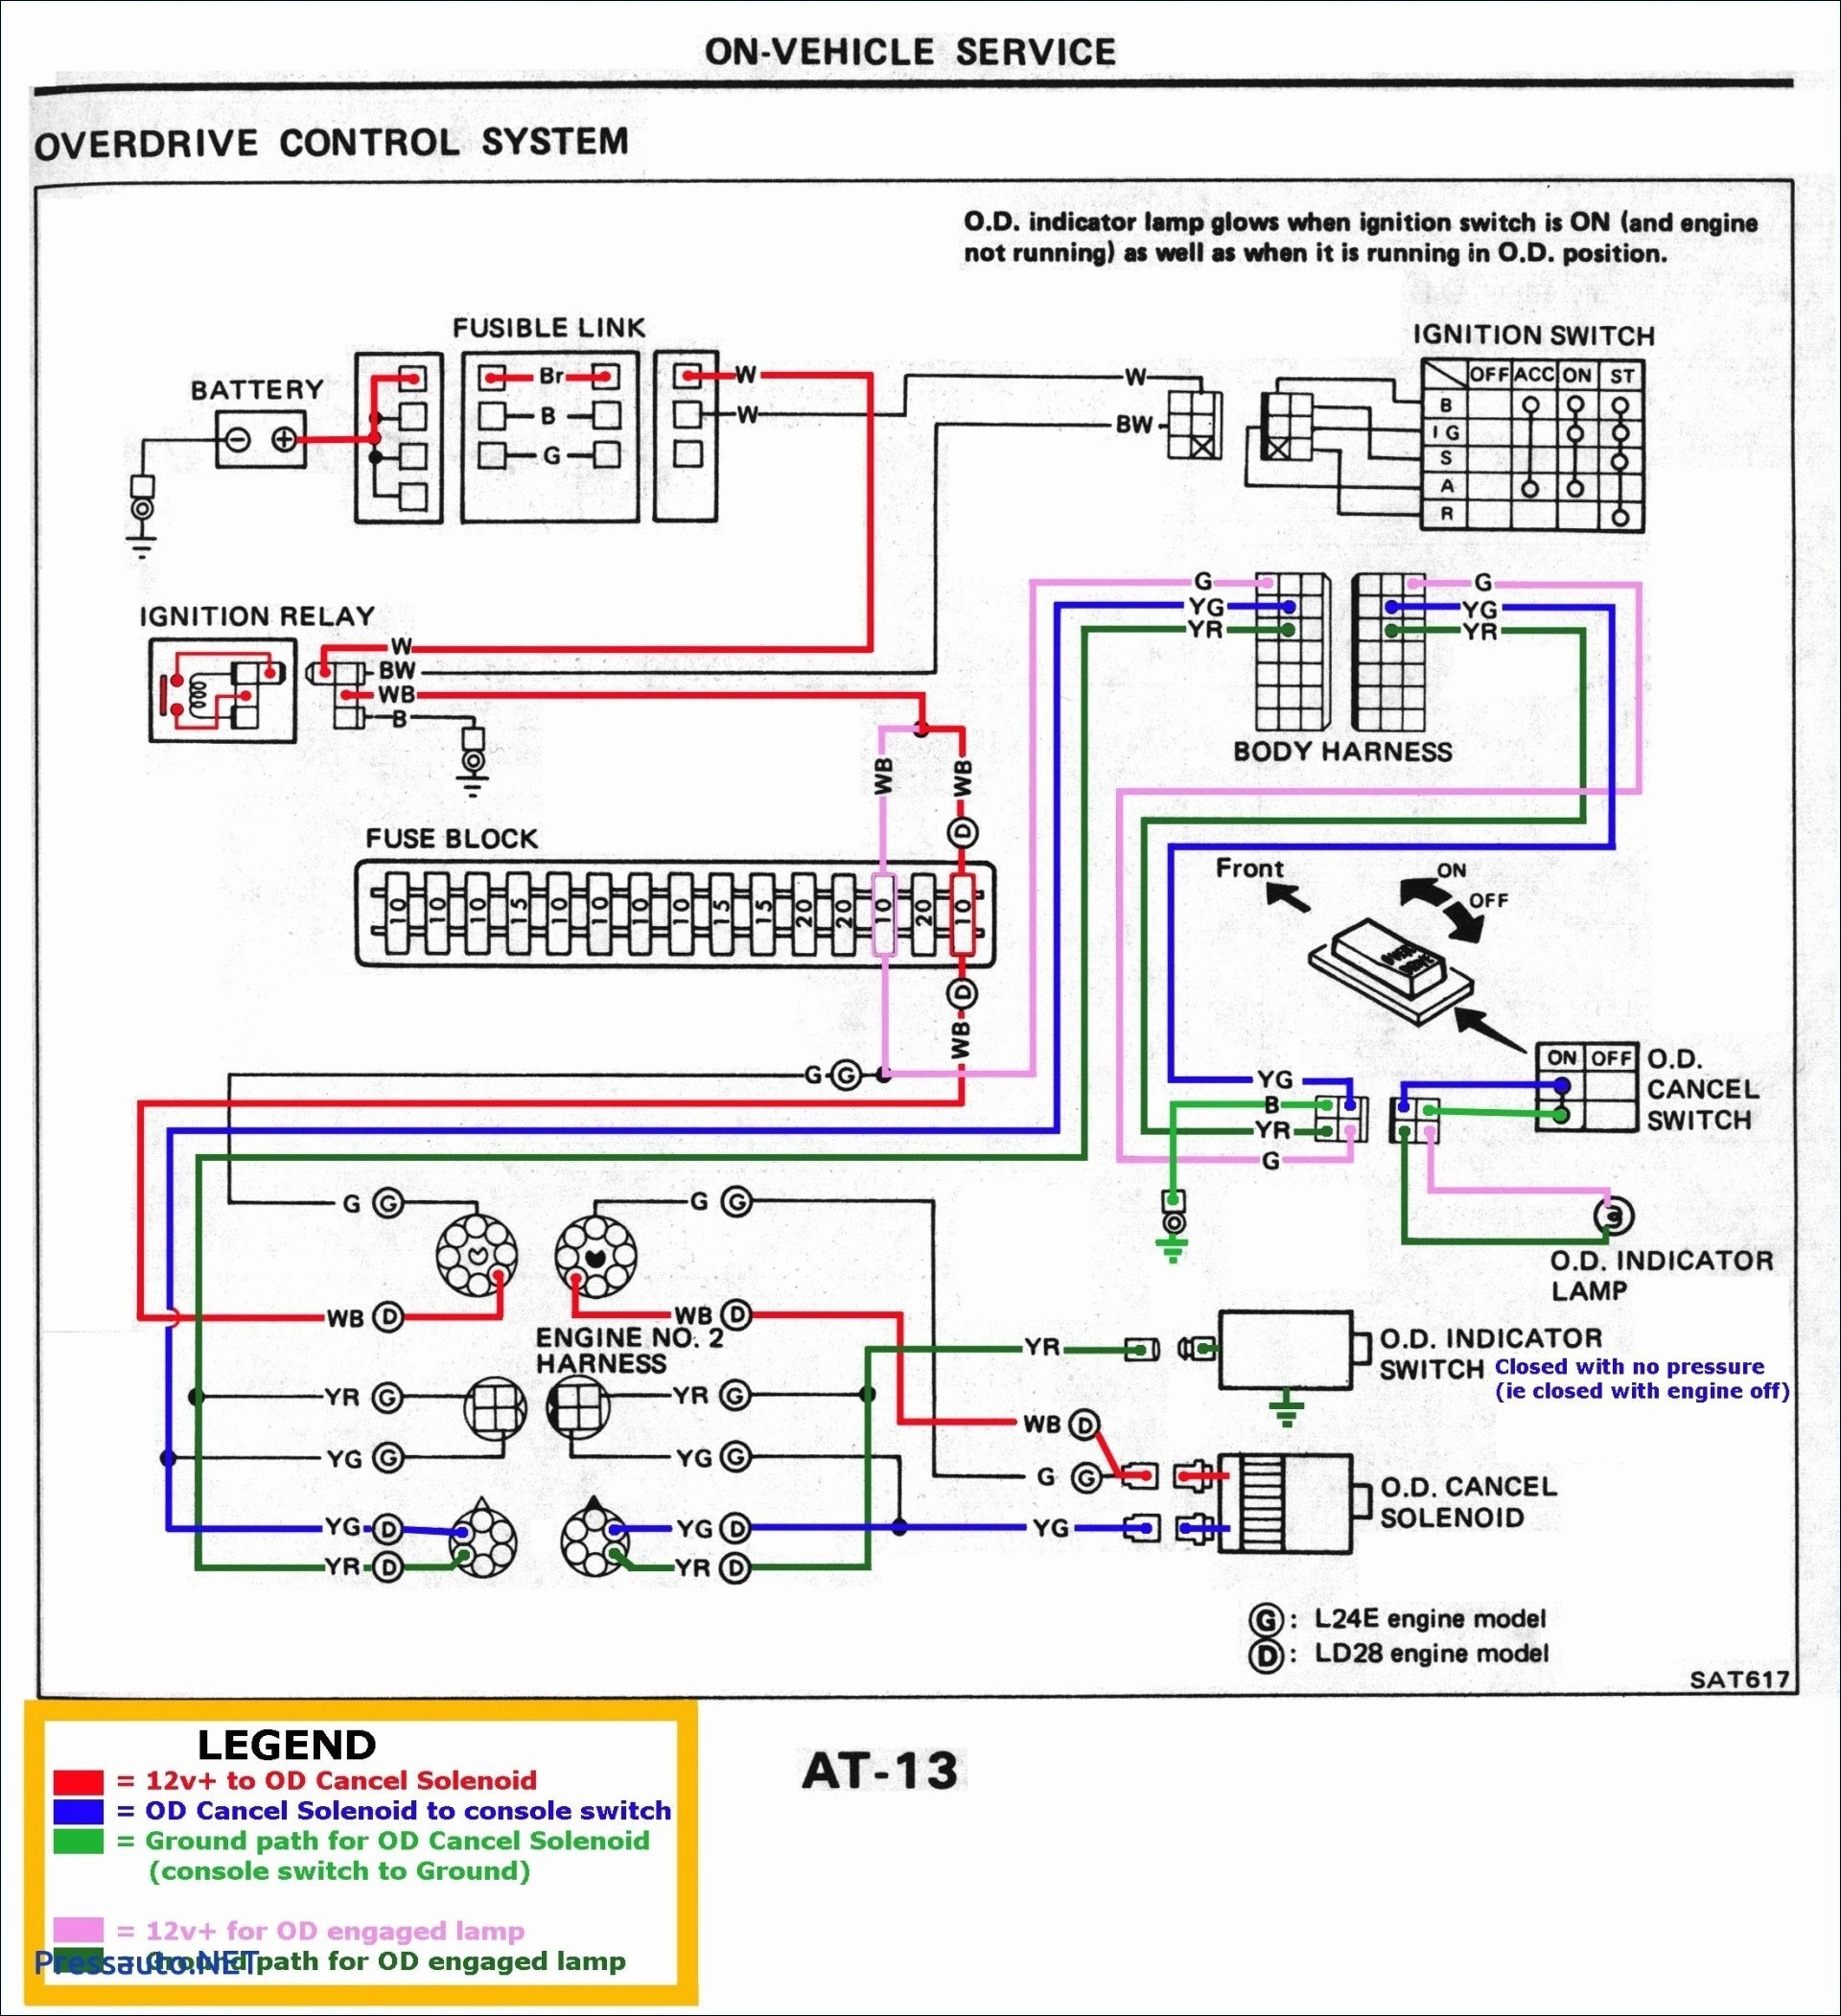 Wiring Diagram for Turn Signals Wiring Diagrams for Turn Signal Best Stop Turn Tail Light Wiring Of Wiring Diagram for Turn Signals